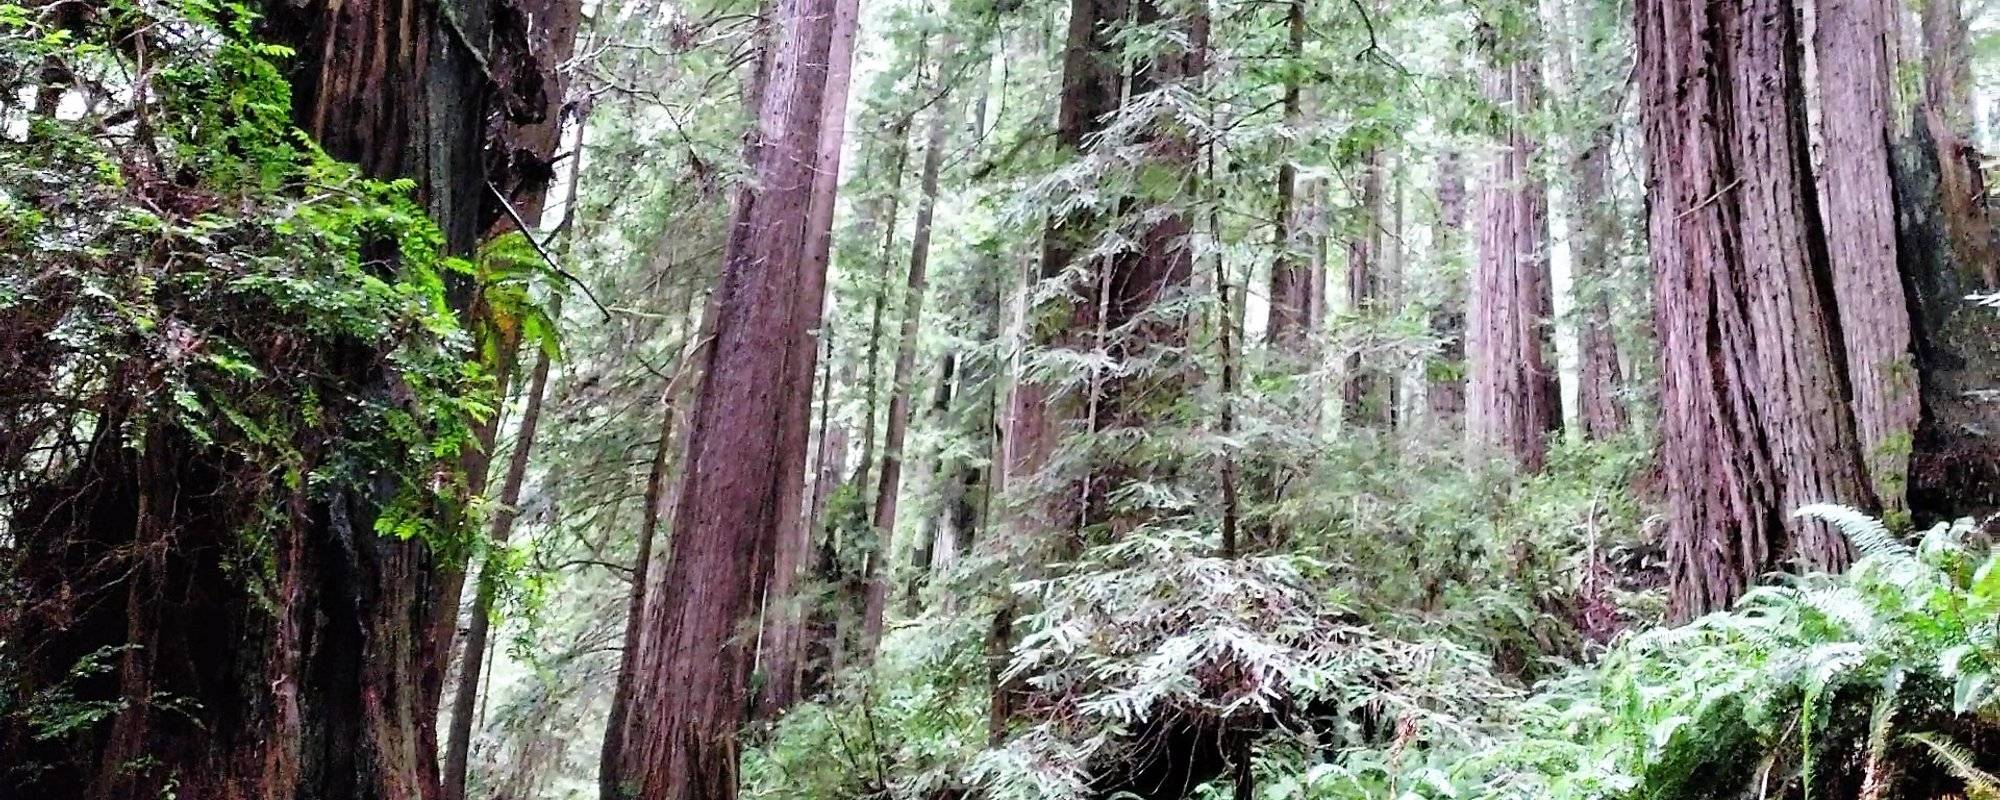 R2R Travelogue 12: Redwood Forests of Northern California